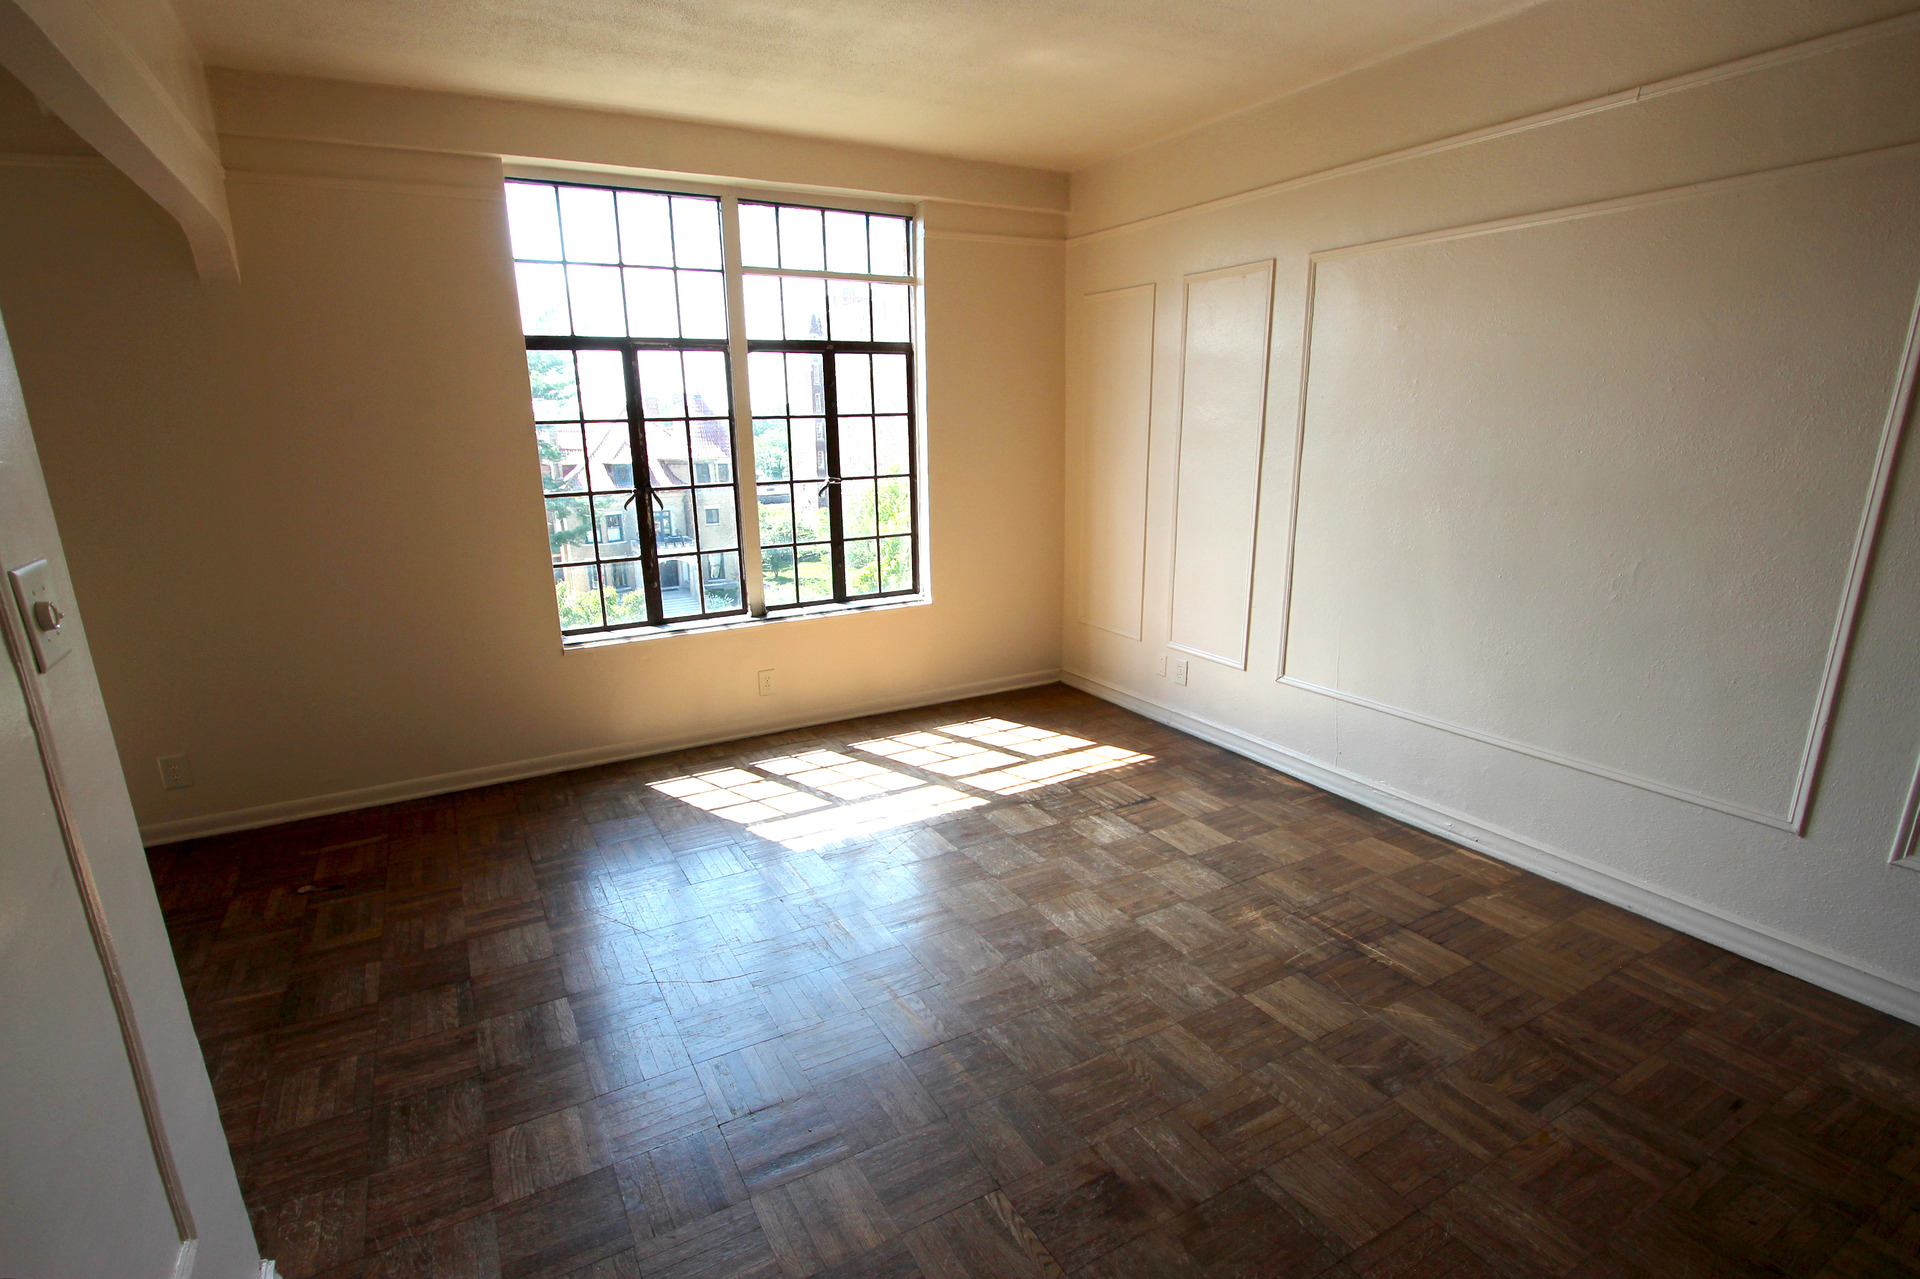 Apartment interior with window and parquet floors